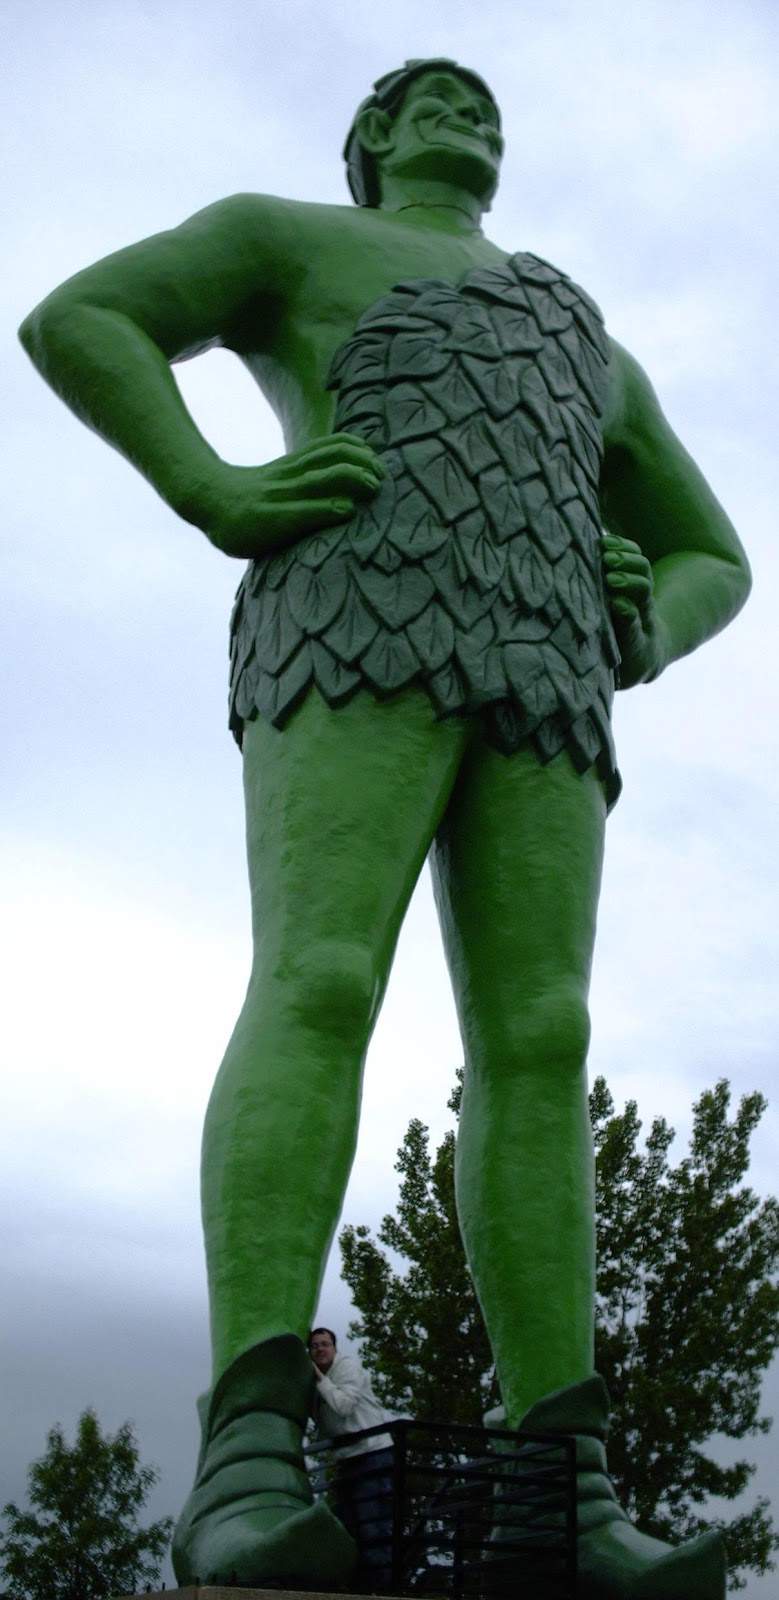 All This Is That: The Jolly Green Giant Statue